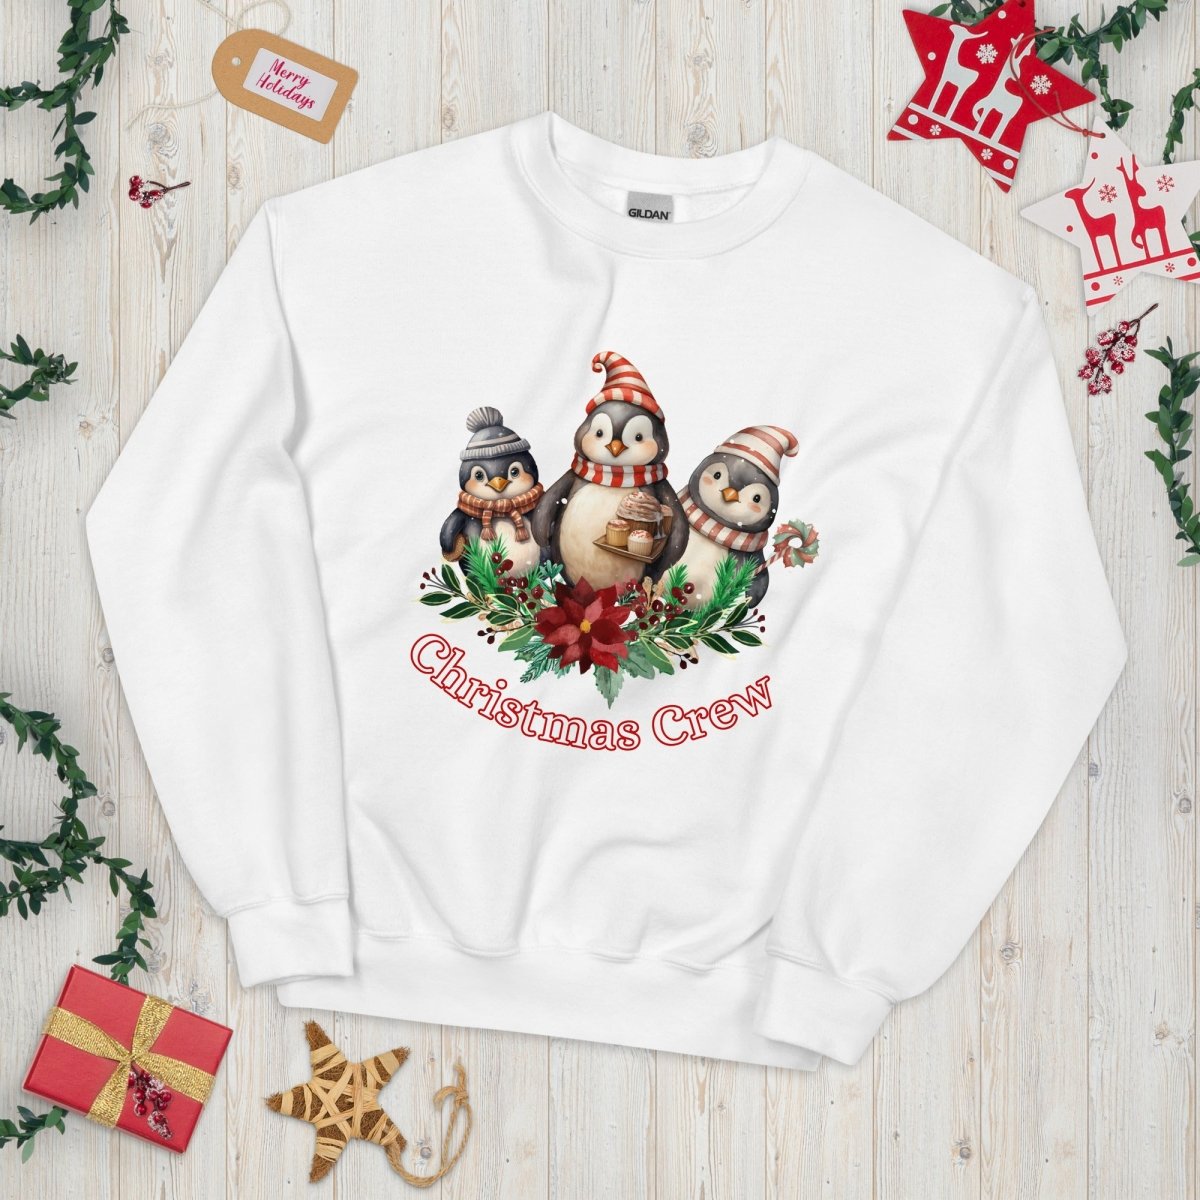 Penguin Christmas Crew Pullover - High Quality Festive Family Unisex Sweater, Family Reunion Sweatshirt, Holiday Pullover, Christmas Vacation - Everything Pixel